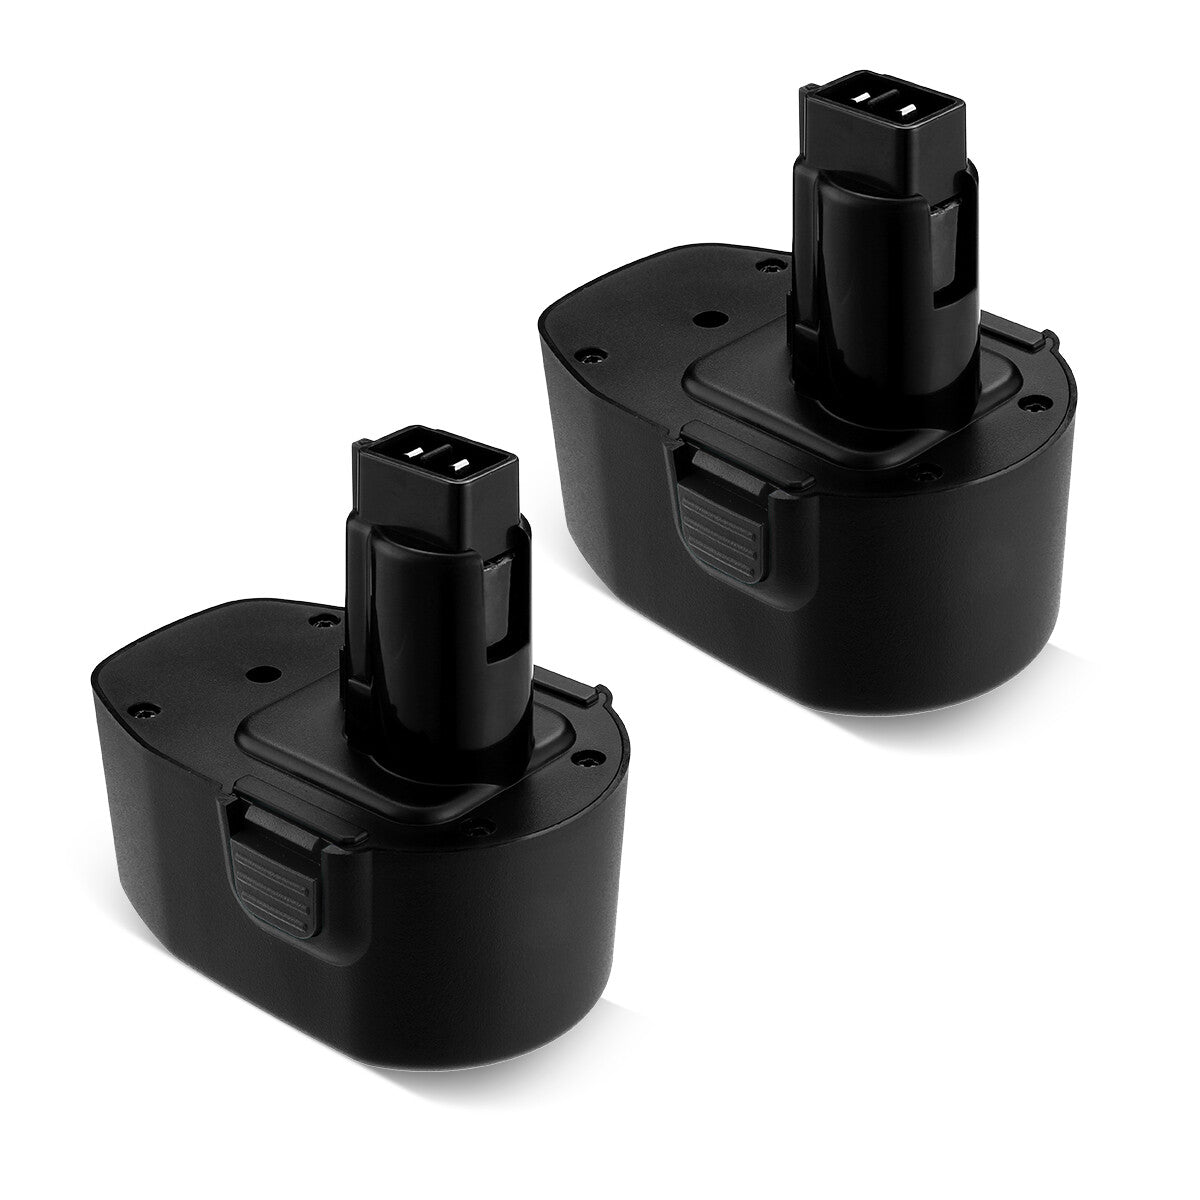 2-Pack 3000mAh 3.6V Replacement Battery for Black & Decker